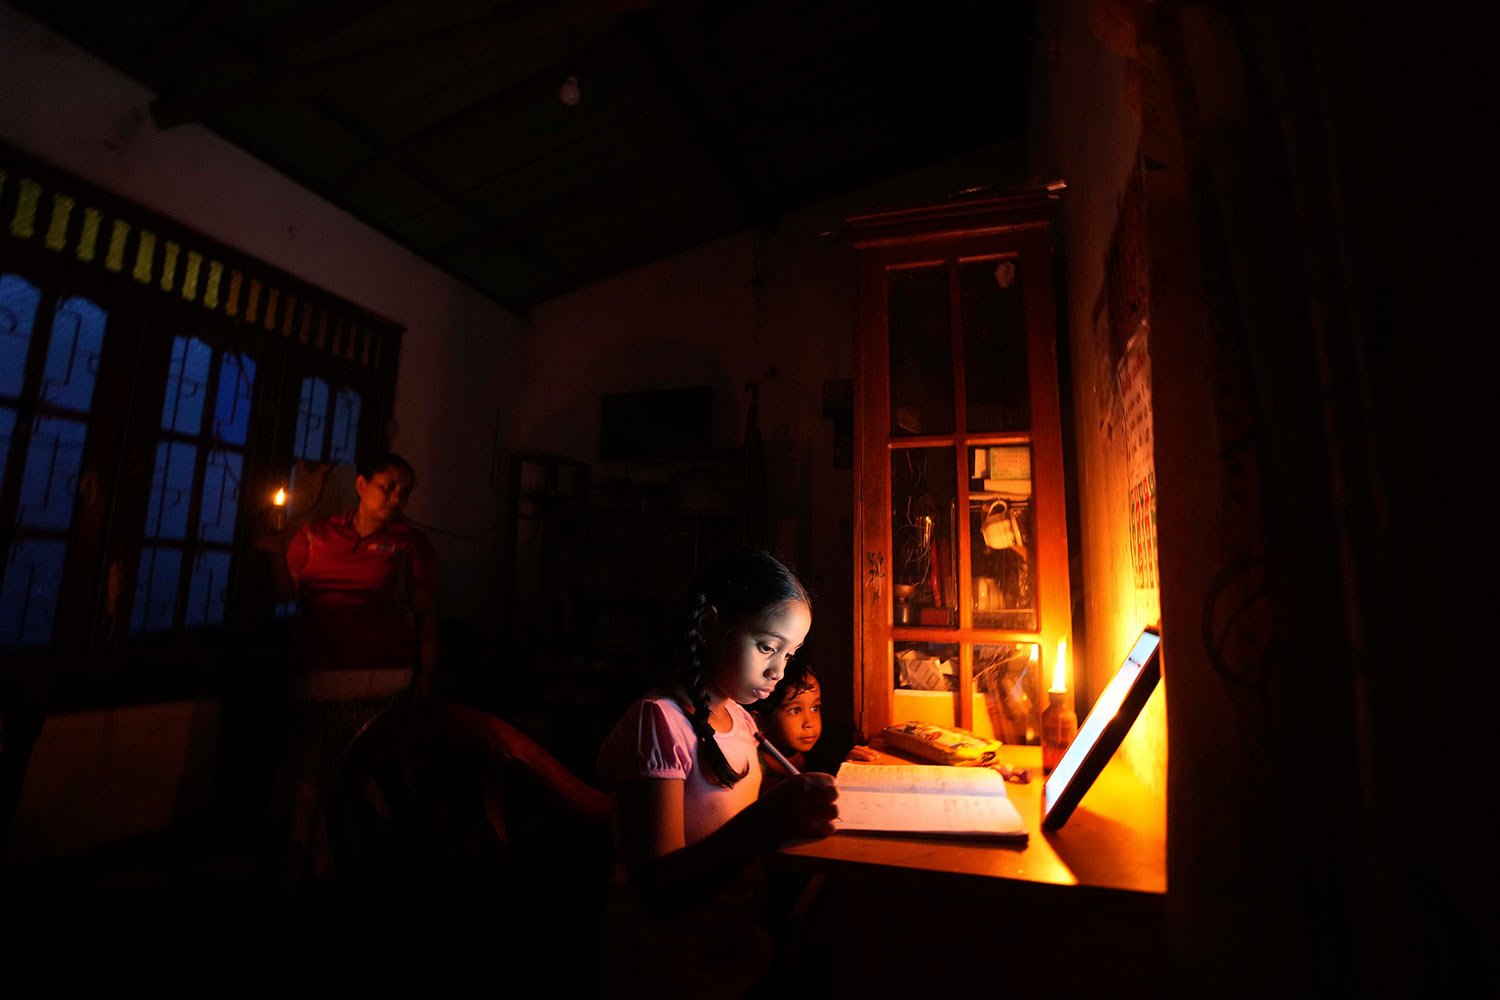  A girl uses a kerosine oil lamp to attend online lessons during a power cut in Colombo, Sri Lanka, Friday, March 4, 2022.  (AP Photo/Eranga Jayawardena, File) 